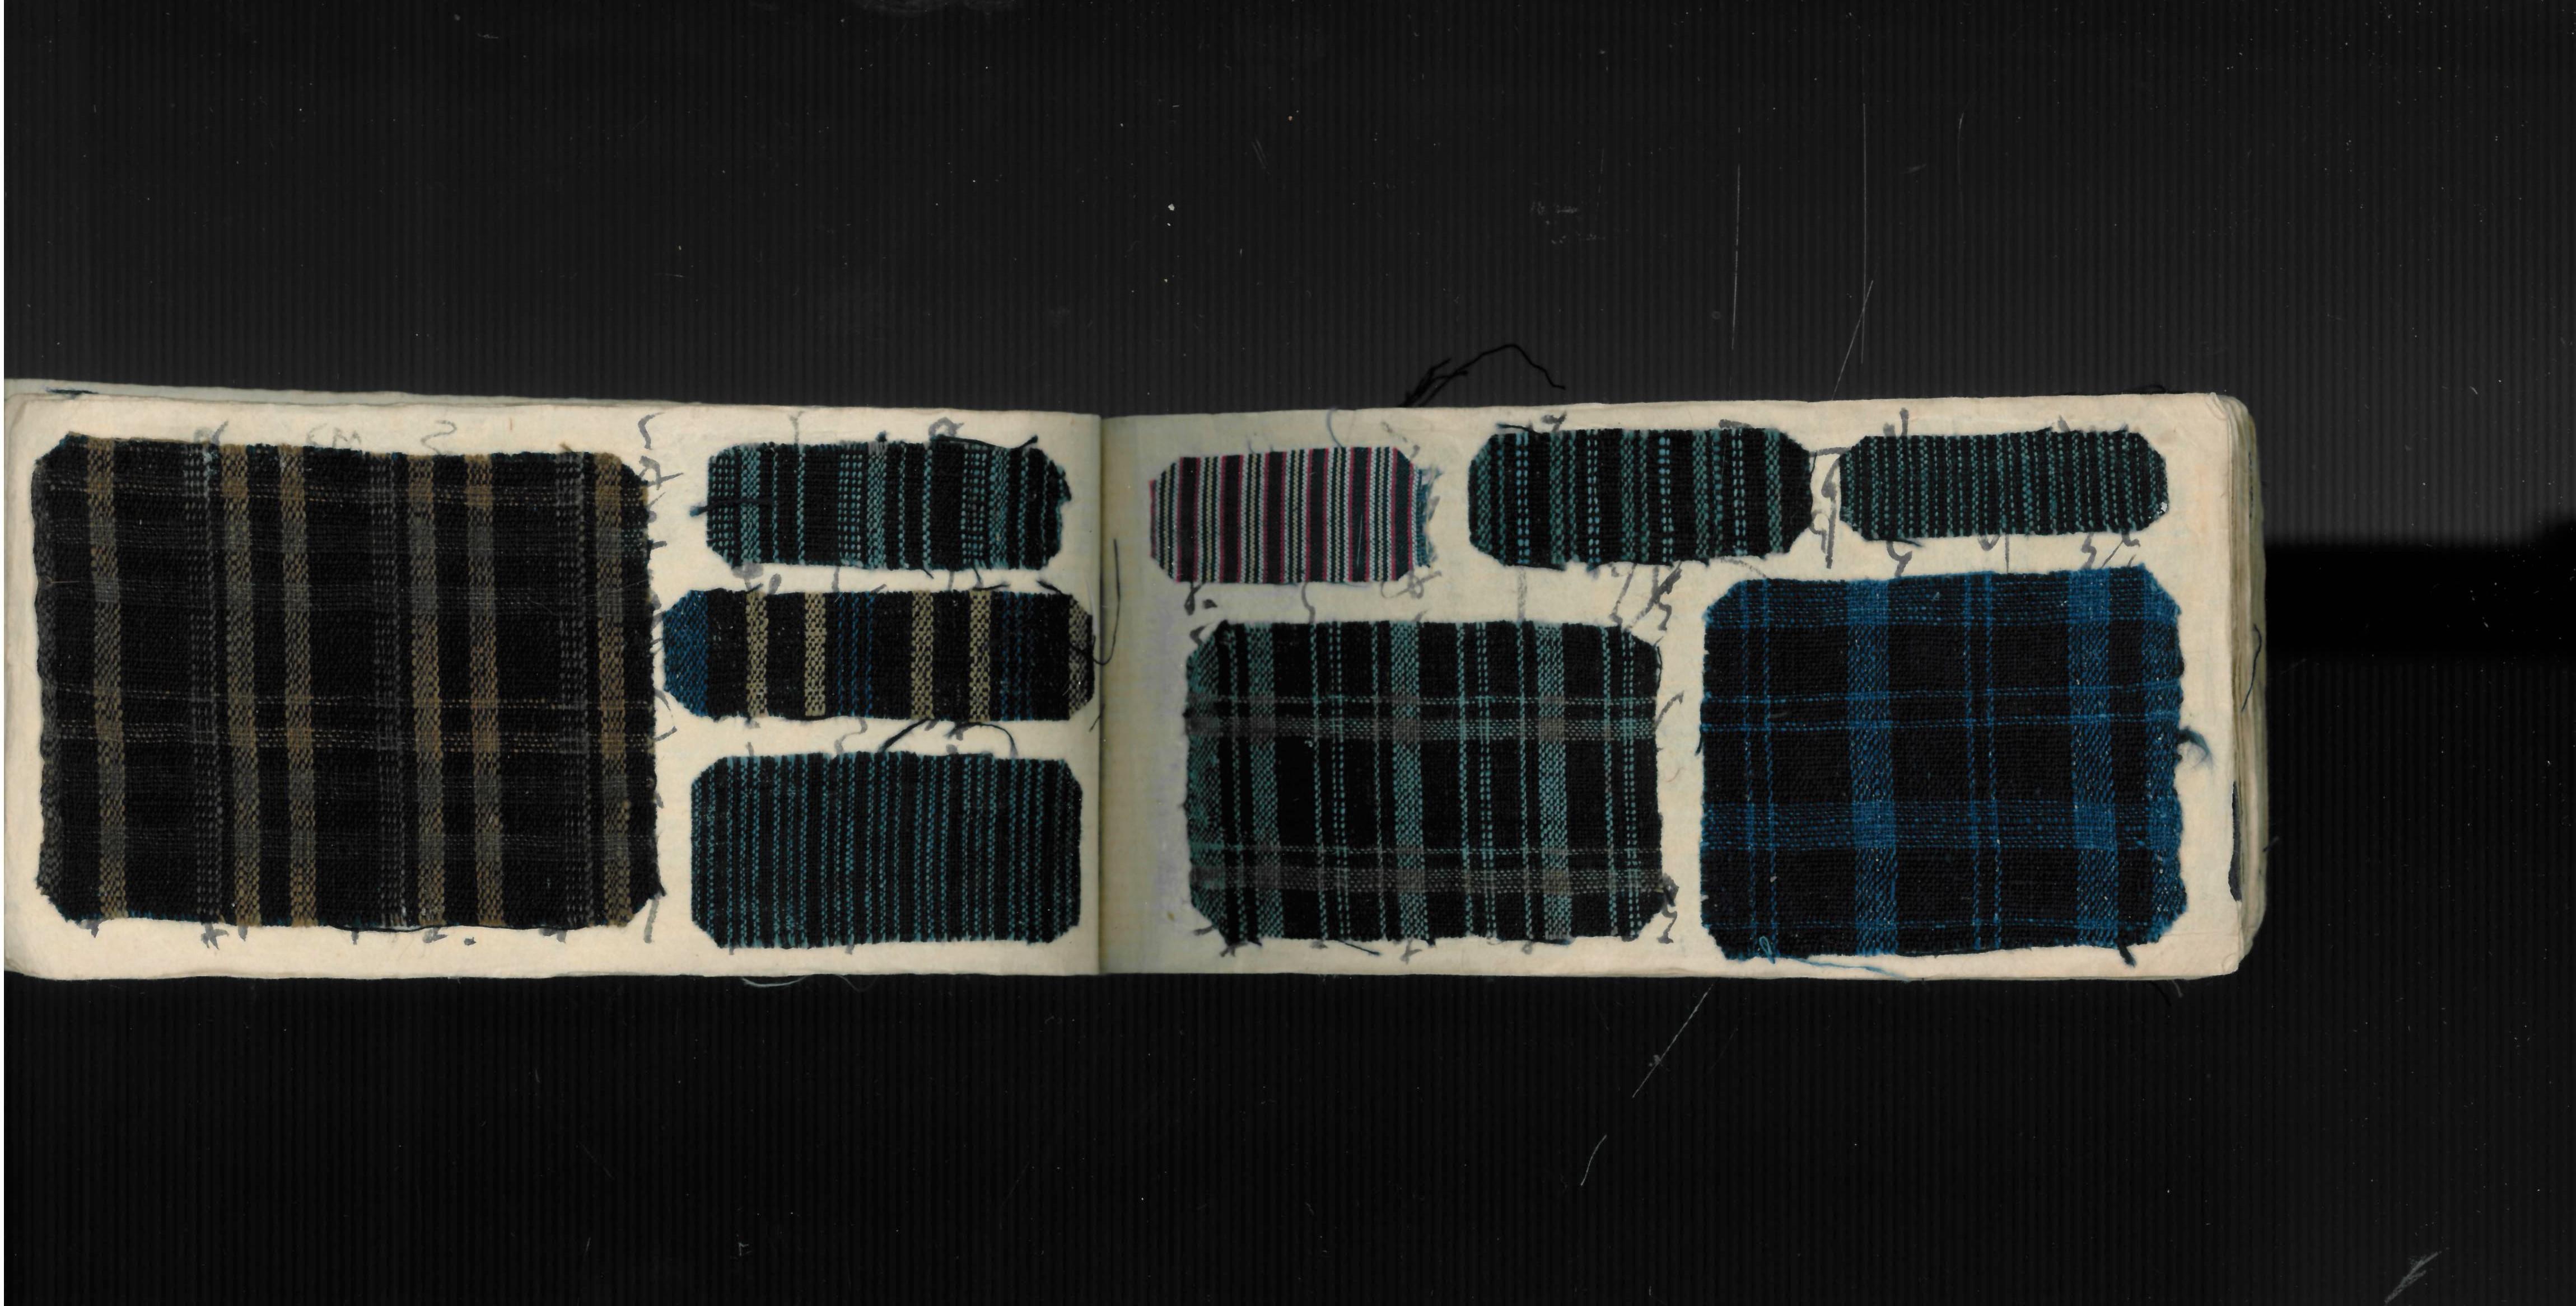 Dating from the 1880s during the Meiji period, this is a book of Japanese textile samples of the sorts of fabrics which would have been used for making artisan's or working man's kimono. Most of the samples are of blue or indigo colour and would